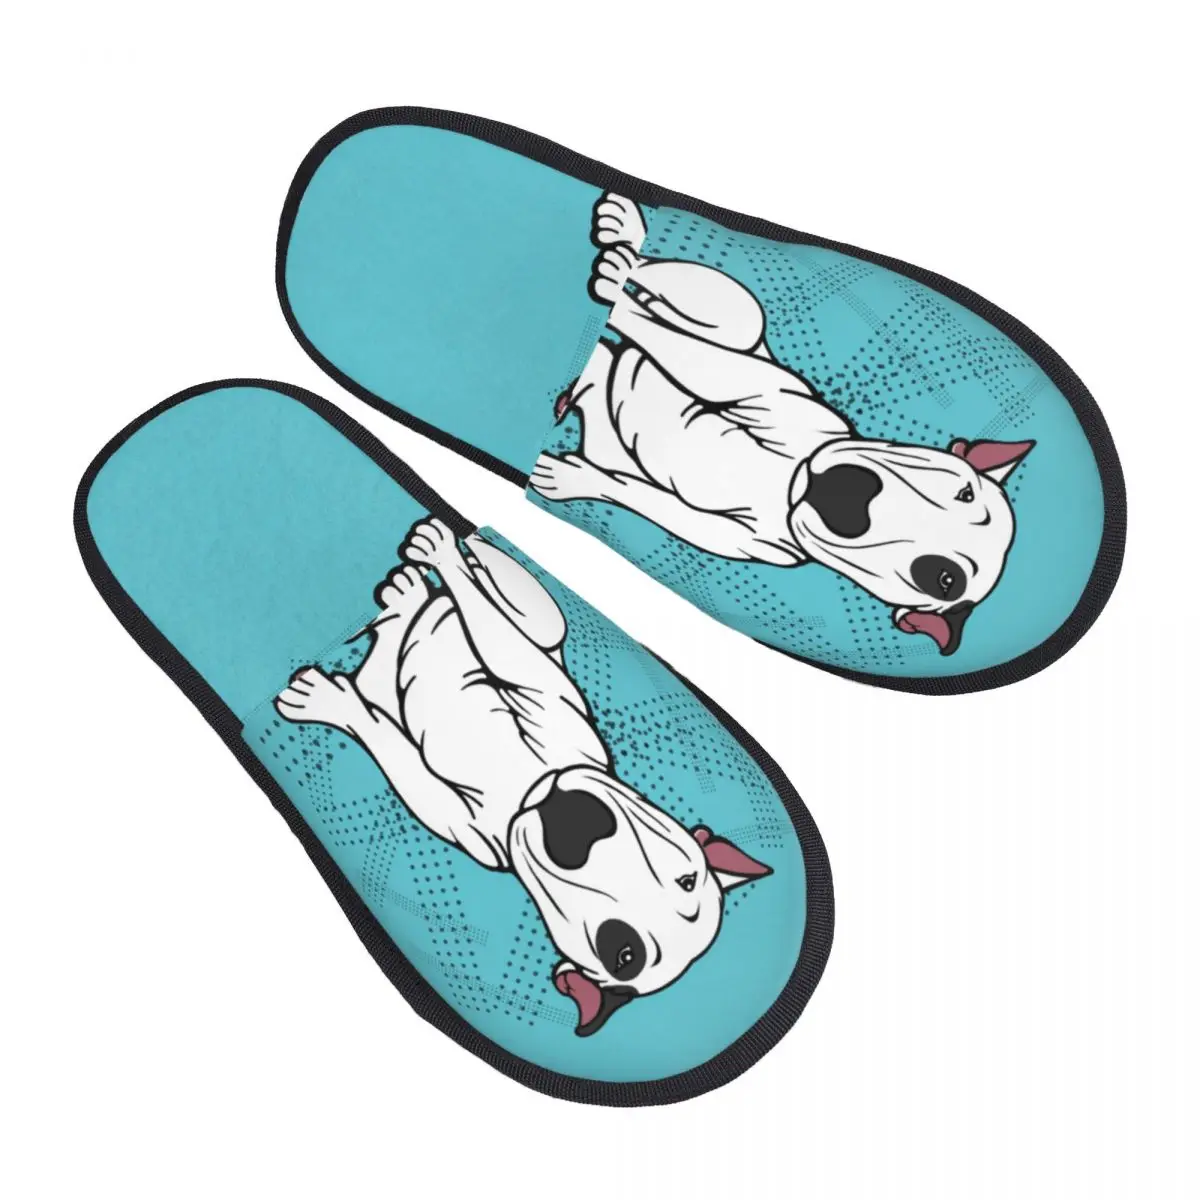 

English Bull Terrier Comfy Scuff With Memory Foam Slippers Women Kawaii Cute Doge Bedroom House Shoes